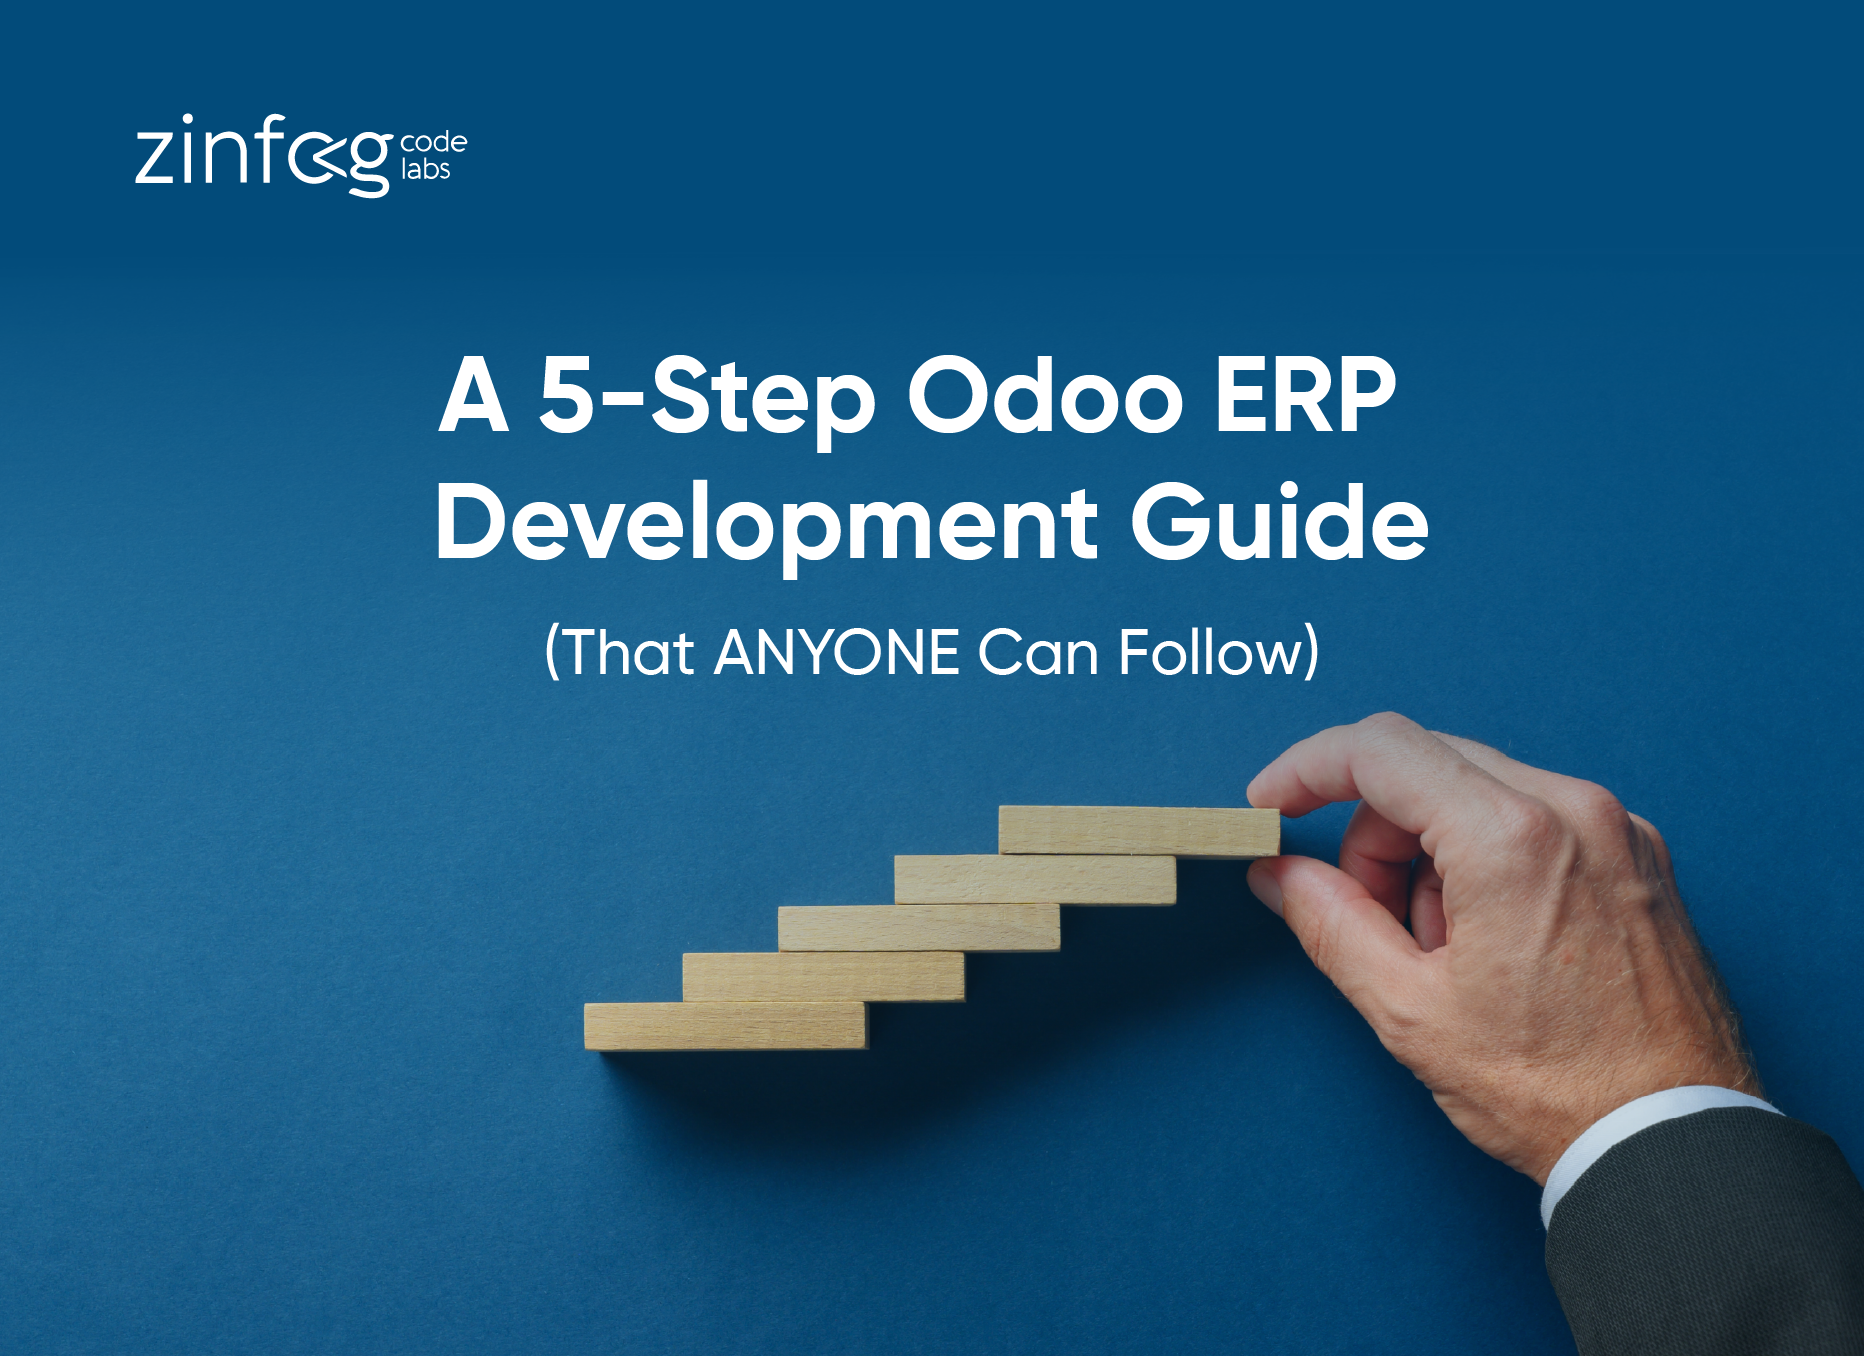 a-5-step-odoo-erp-development-guide-that-anyone-can-follow.html